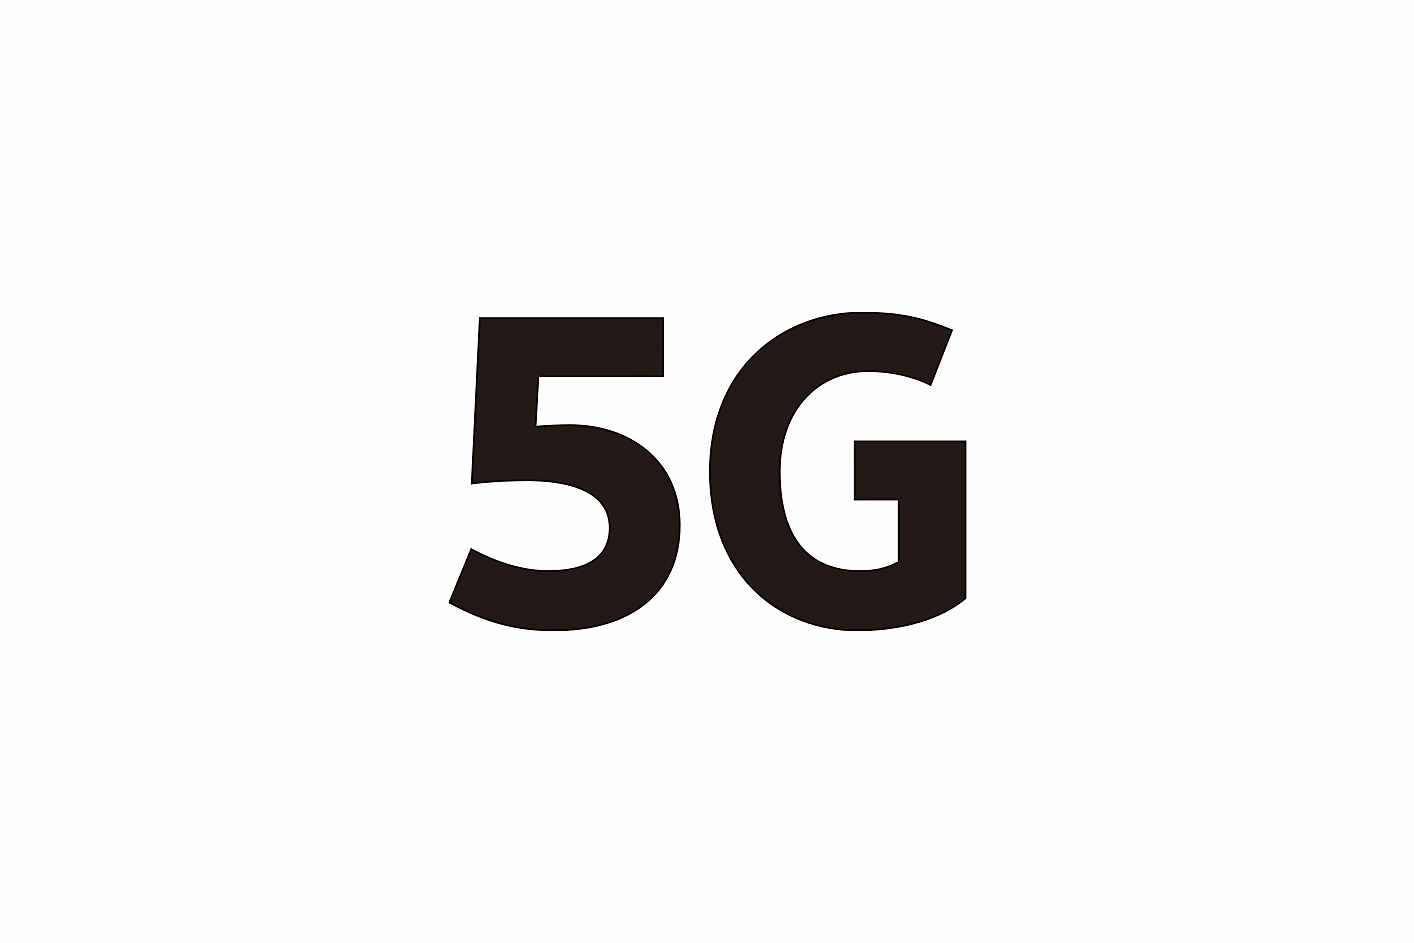 Image of the 5G logo